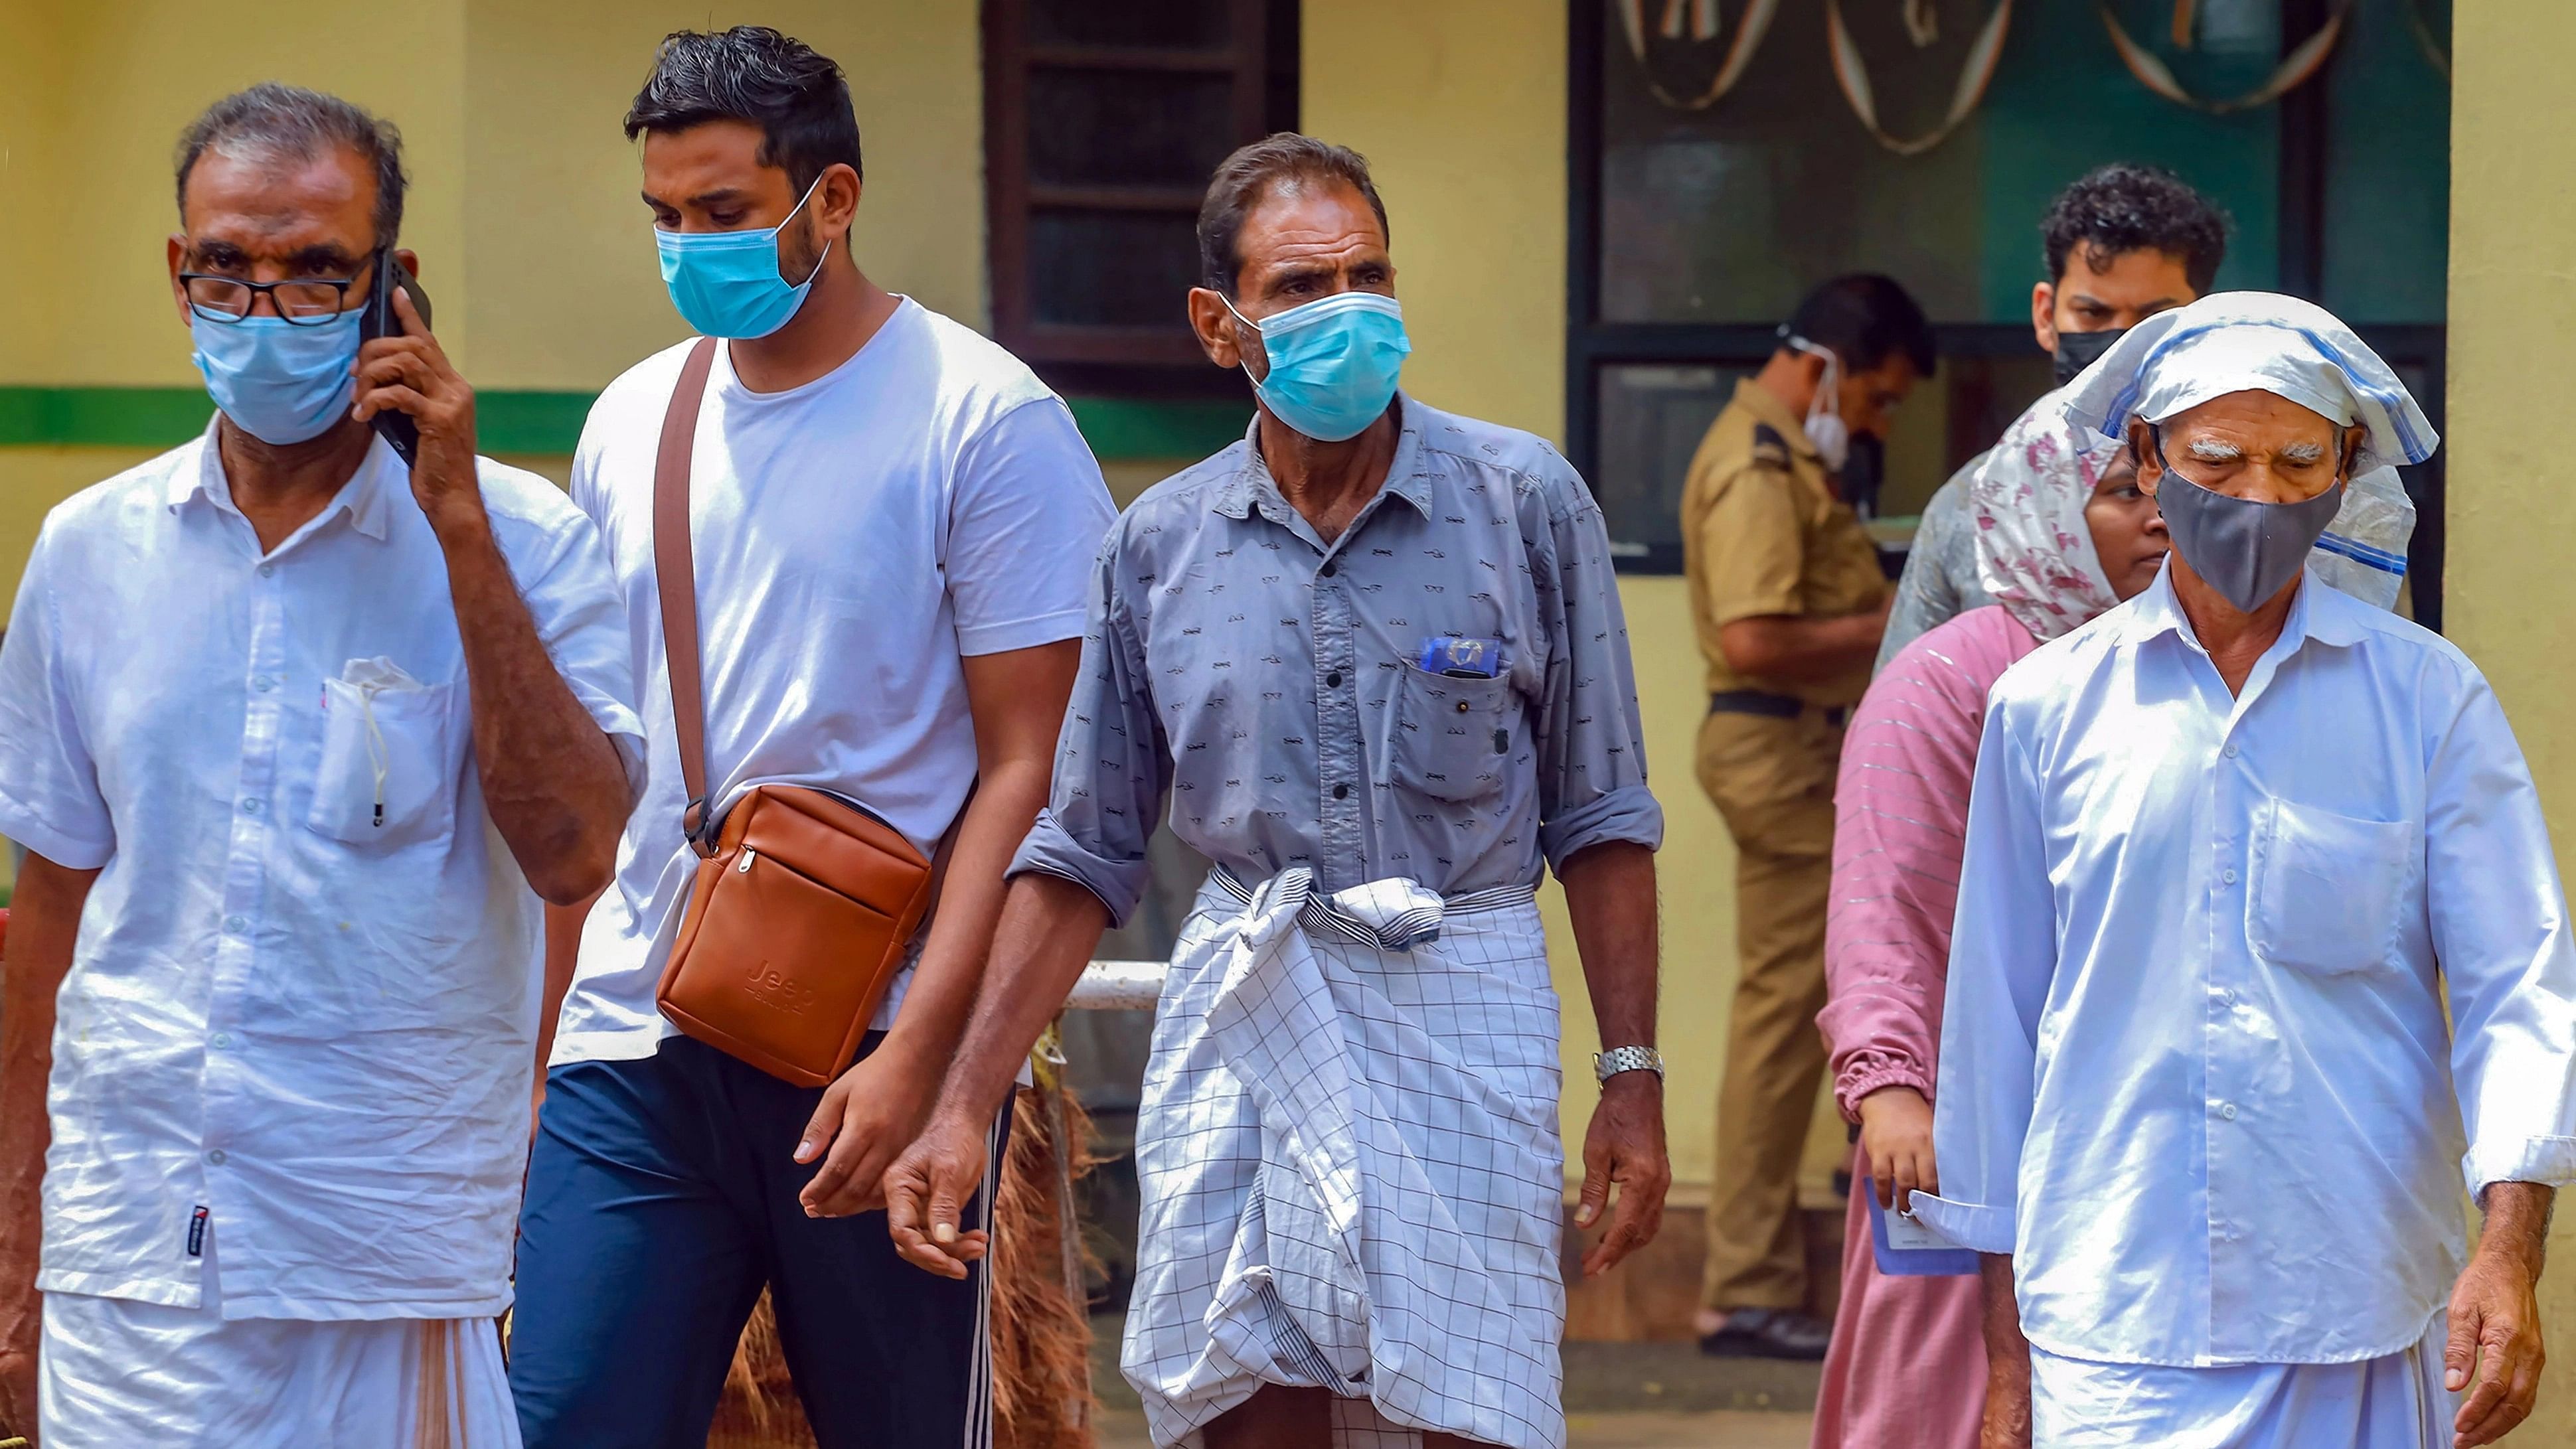 <div class="paragraphs"><p>People wear masks at a medical college after the Nipah virus alert, in Kozhikode.</p></div>